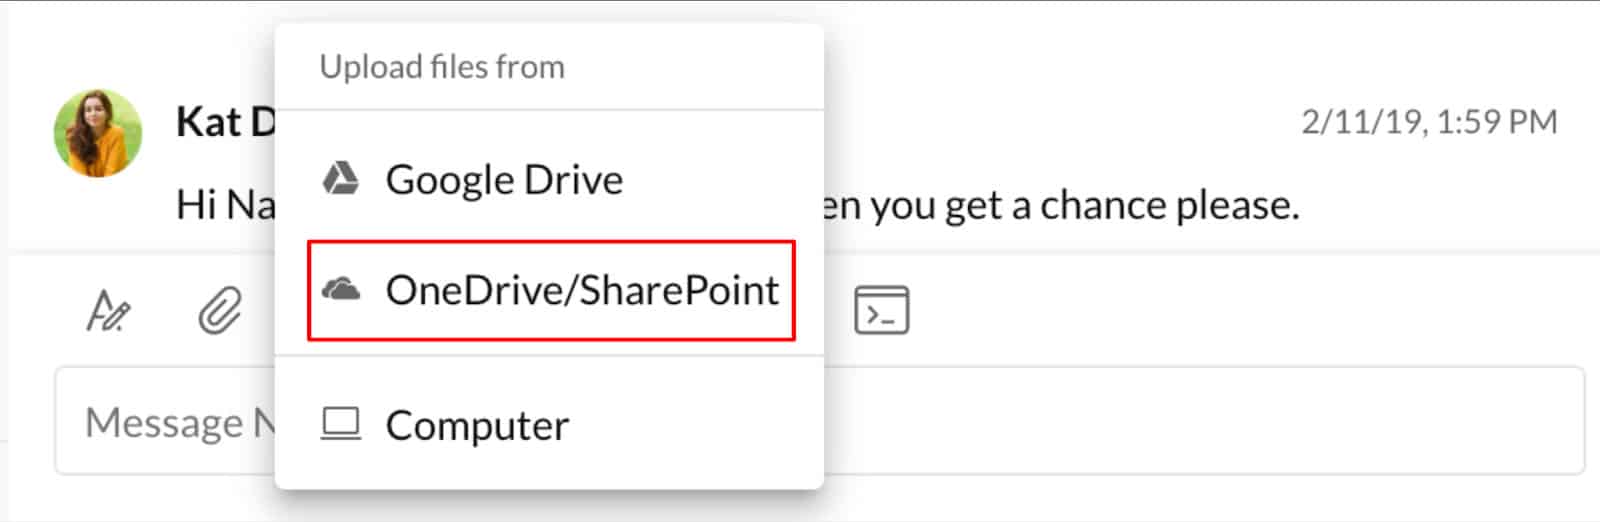 RingCentral interface showing the file upload dialog box with a red box highlighting the OneDrive/SharePoint option.